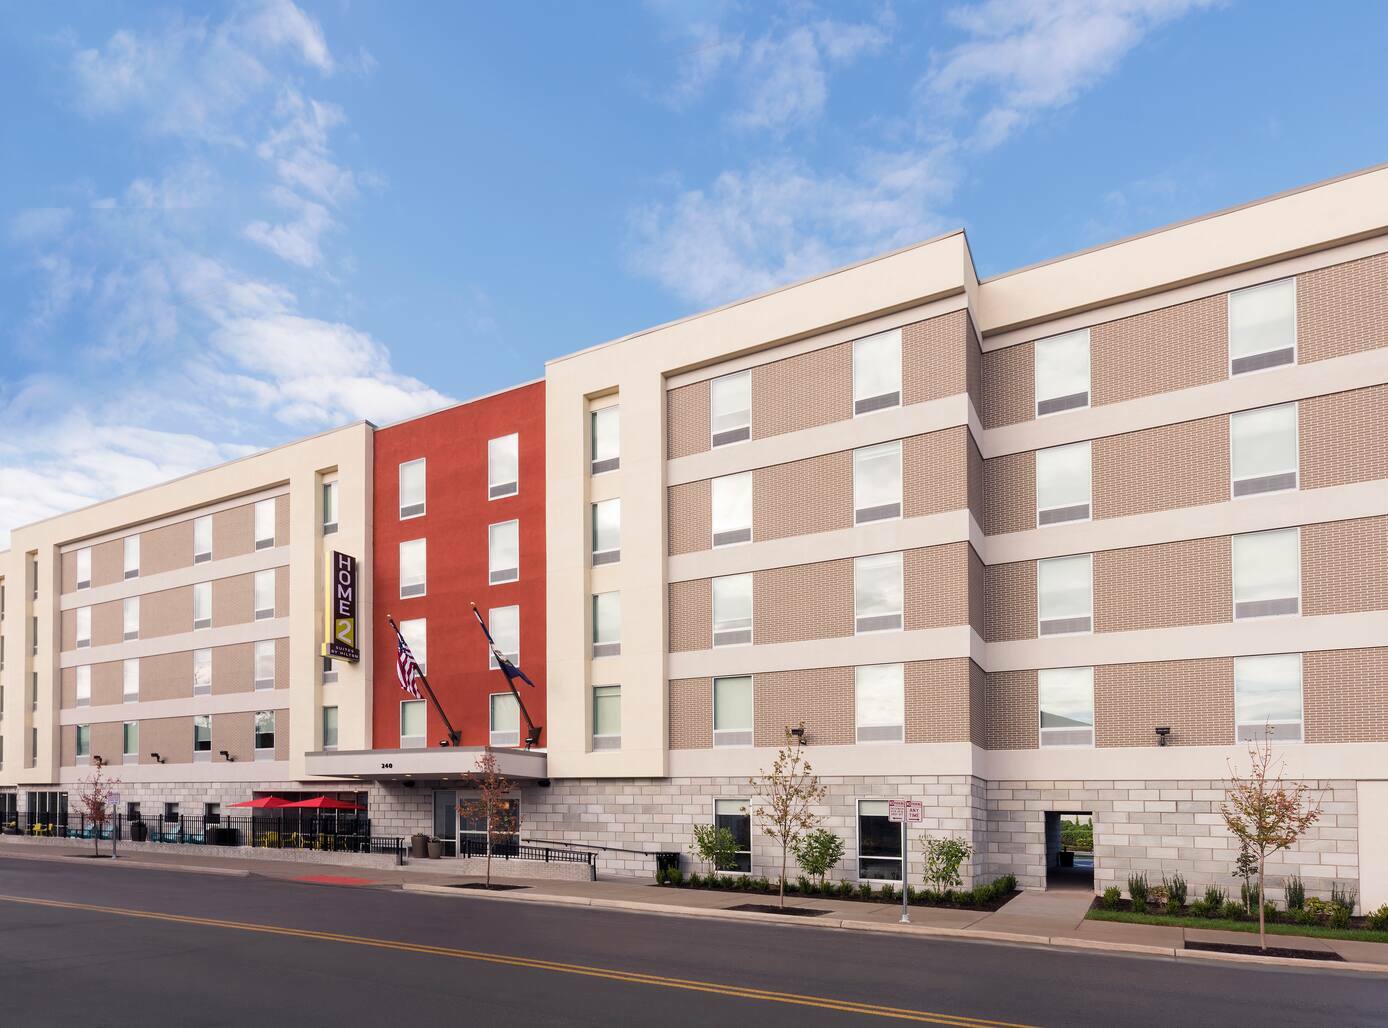 Photo of Home2 Suites by Hilton Louisville Downtown NuLu, Louisville, KY